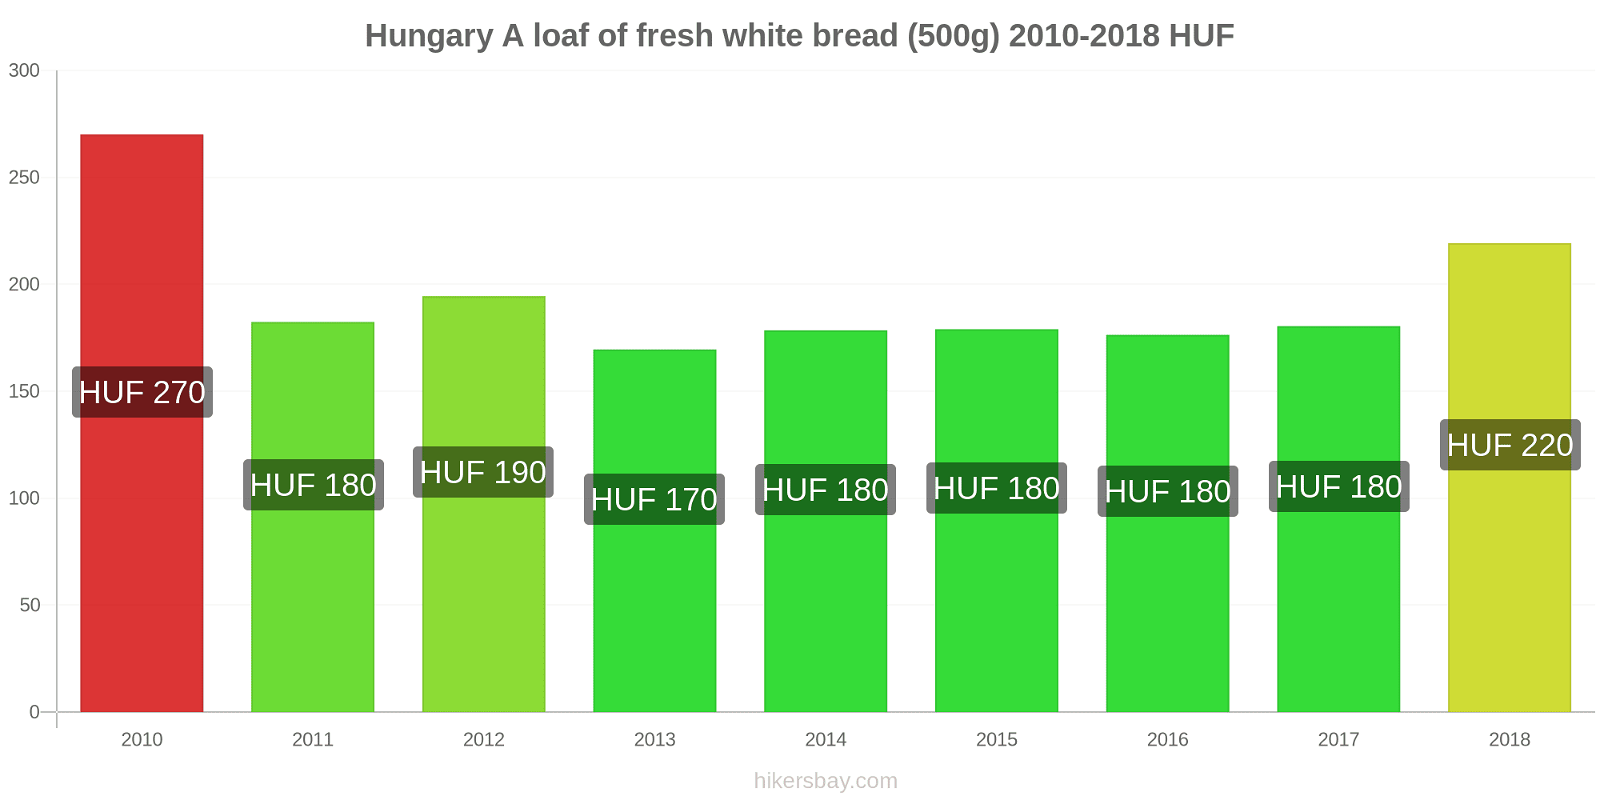 Hungary price changes A loaf of fresh white bread (500g) hikersbay.com